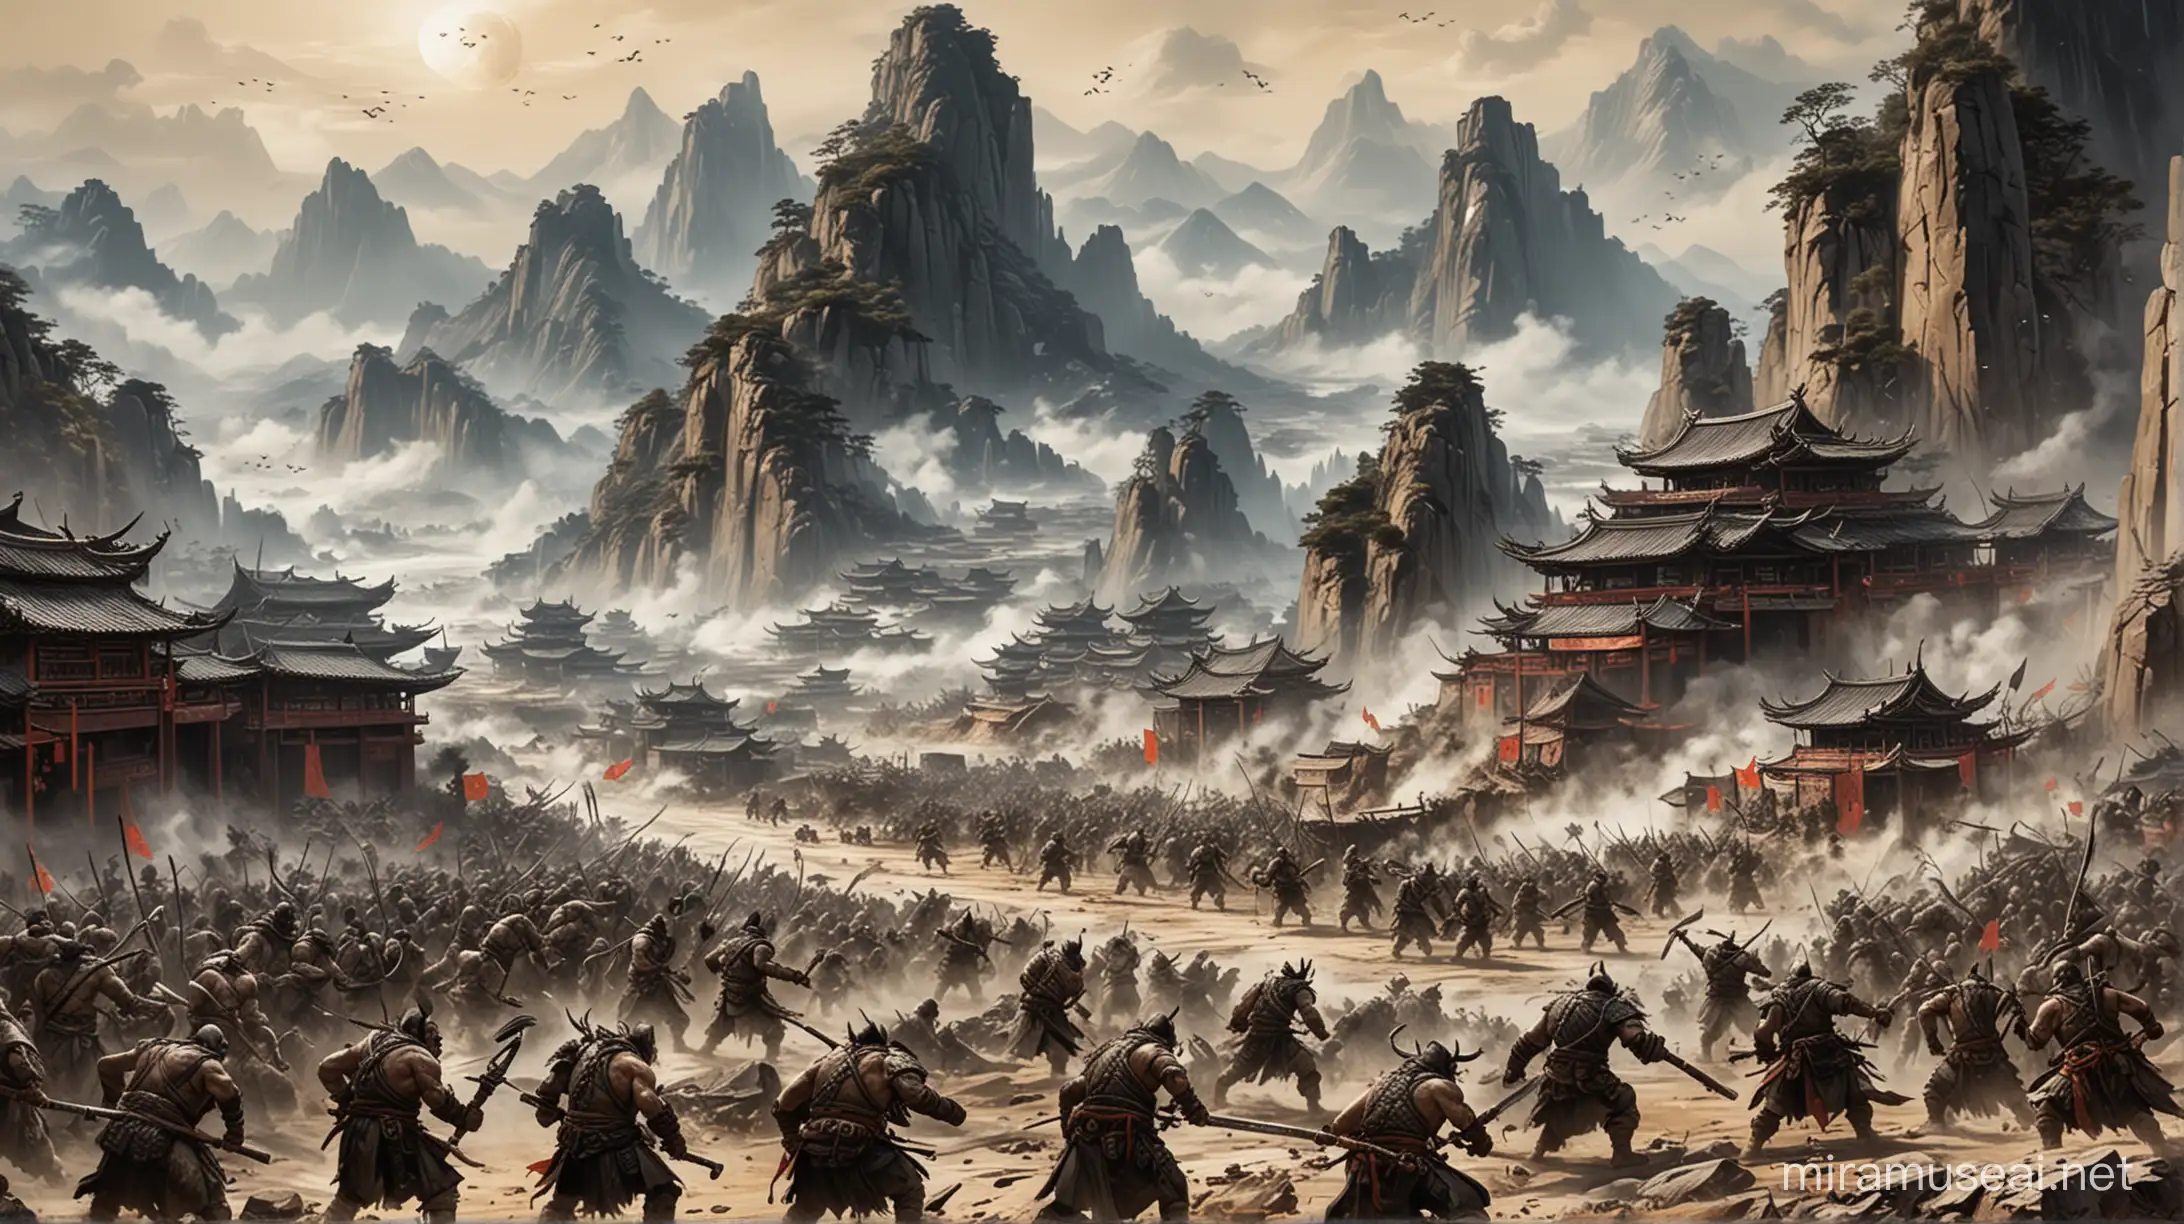 Tribal Orc Army Ravaging Chinese City Epic Battle Scenes